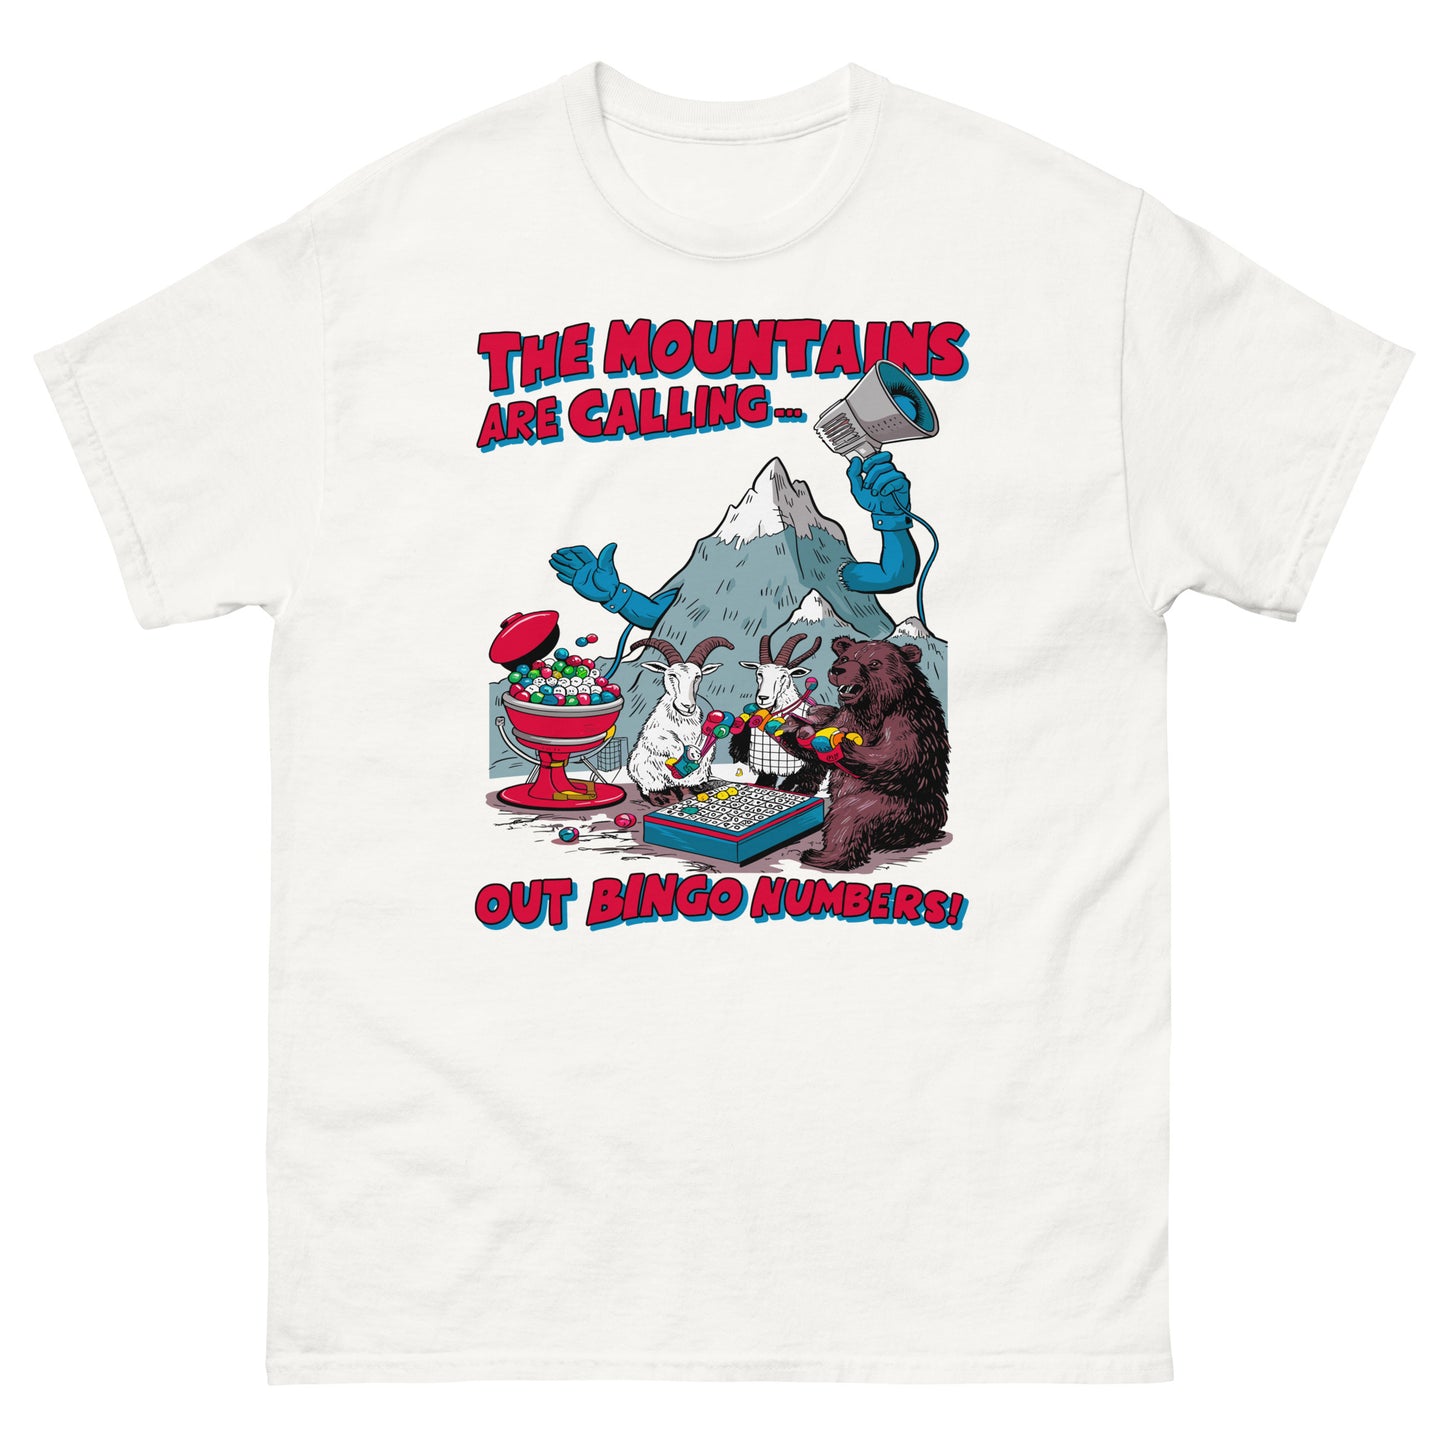 The mountains are calling out bingo numbers design printed on t-shirt by Whistler Shirts